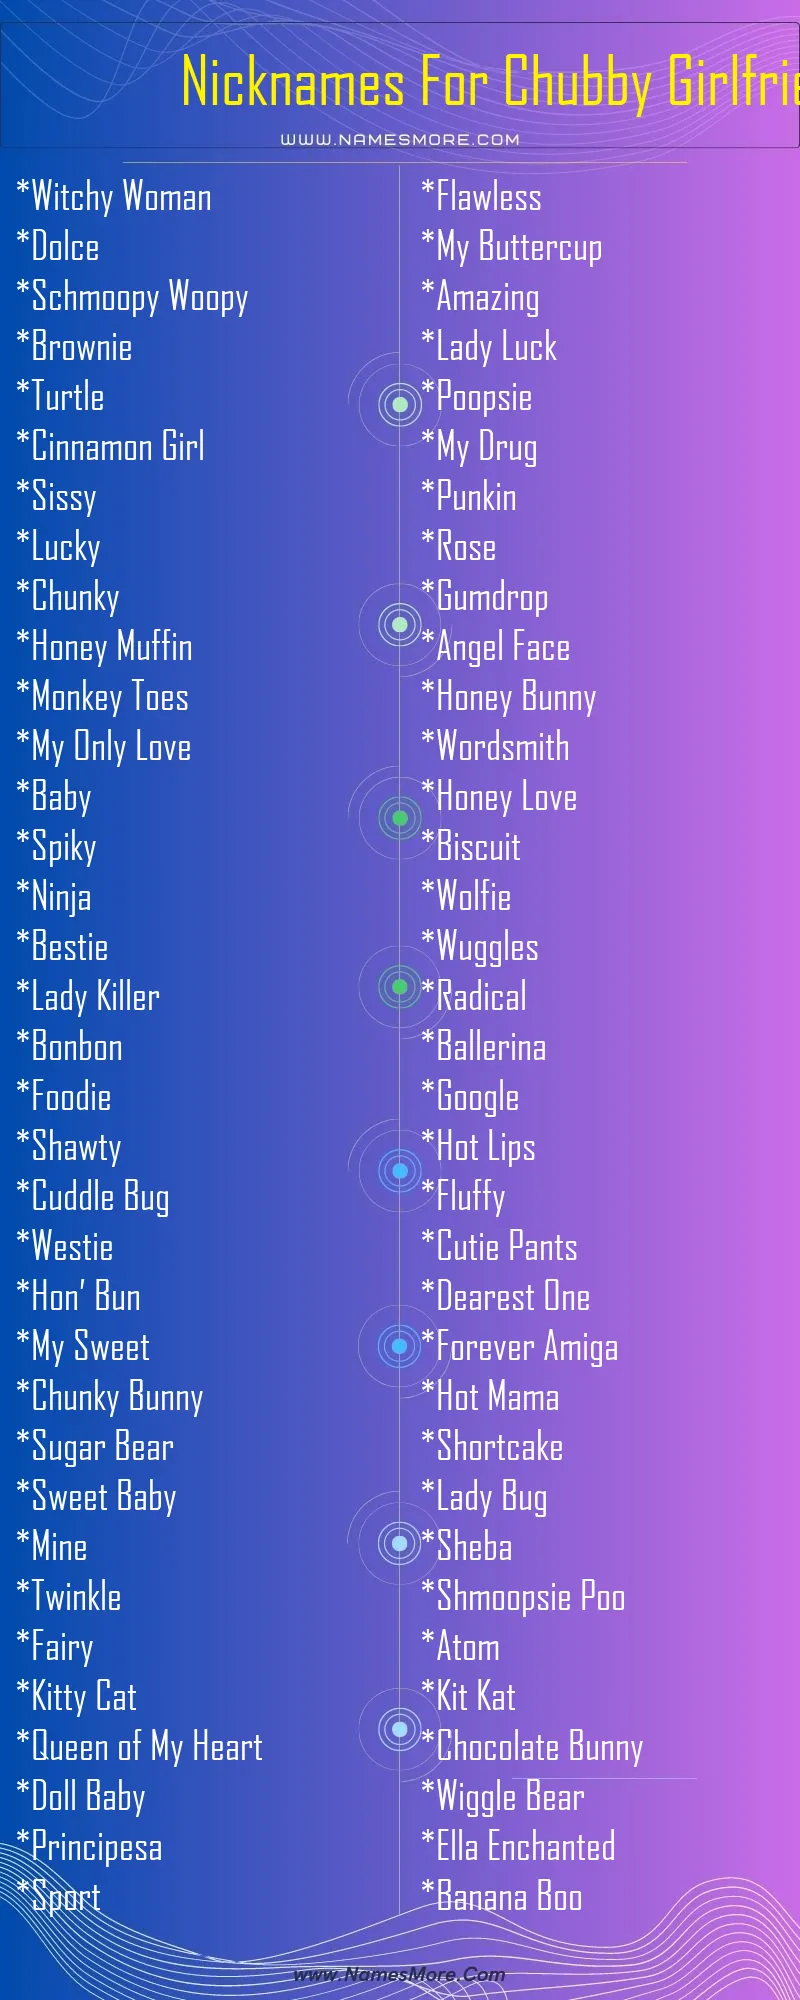 Nicknames For Chubby Girlfriend List Infographic